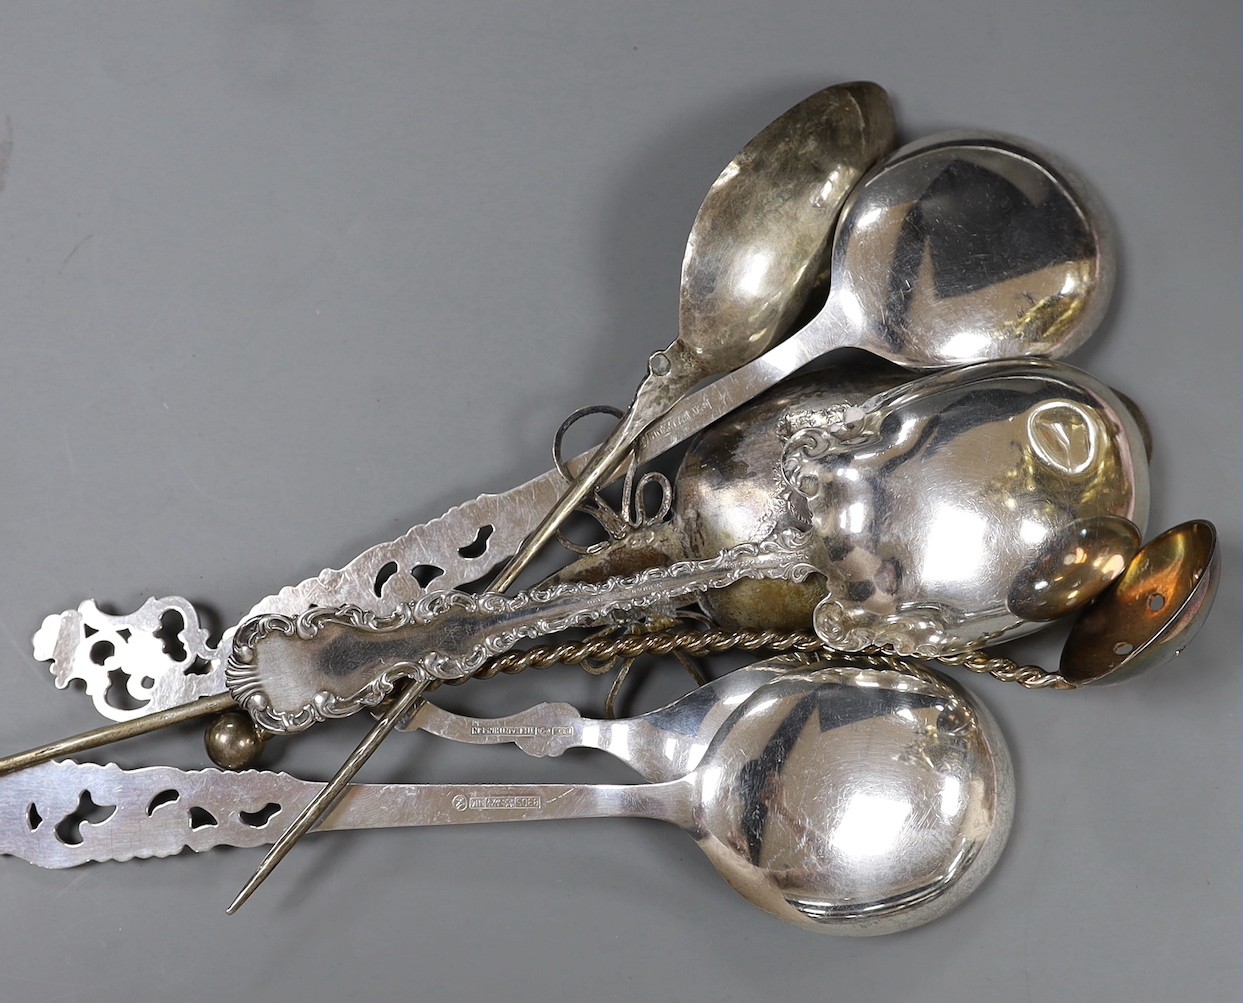 Three 20th century Scandinavian 830 standard white metal ornate spoons, a sterling spoon and three other spoons.